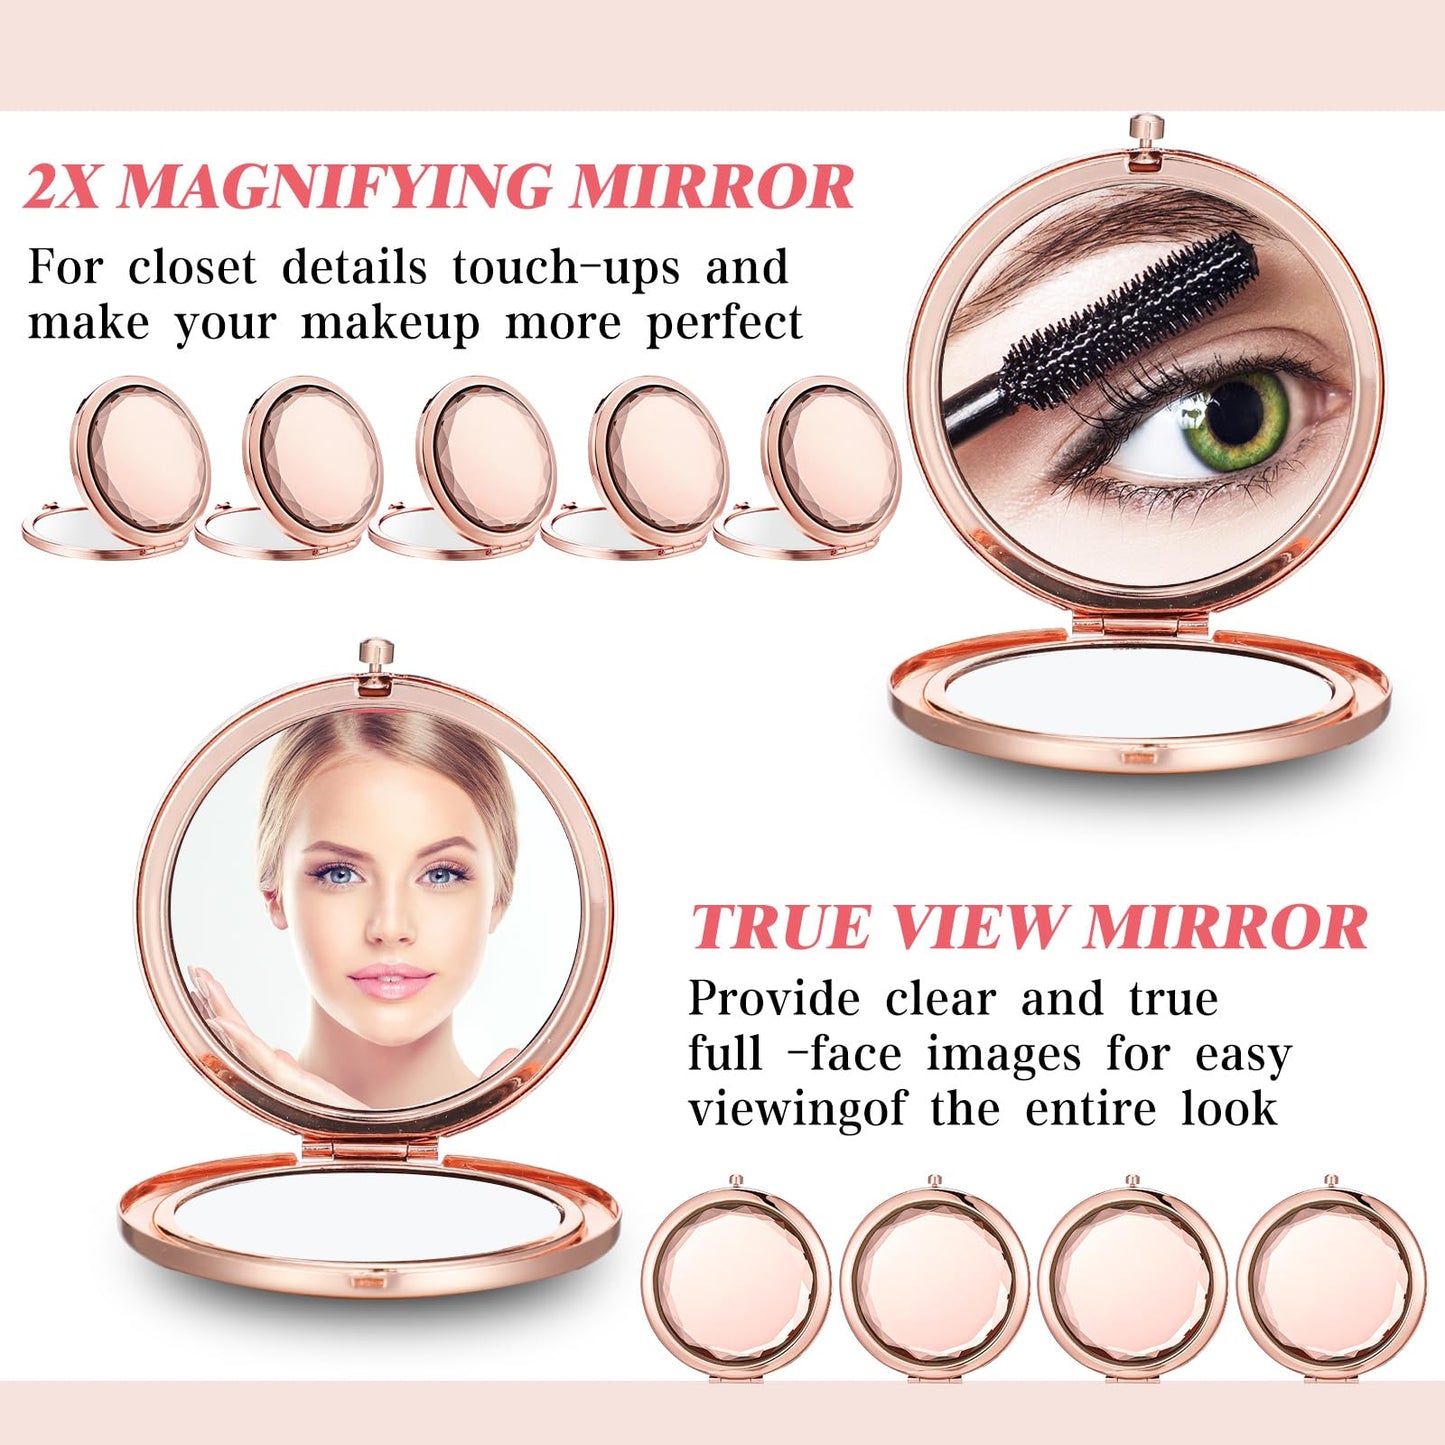 Barydat 24 Set Rose Gold Compact Mirrors Bulk Crystal Compact Makeup Mirrors Double Sided Pocket Mirrors for Women Bridesmaids Wedding Mirrors Gift for Bridal Shower Party Favors Christmas Party Gifts